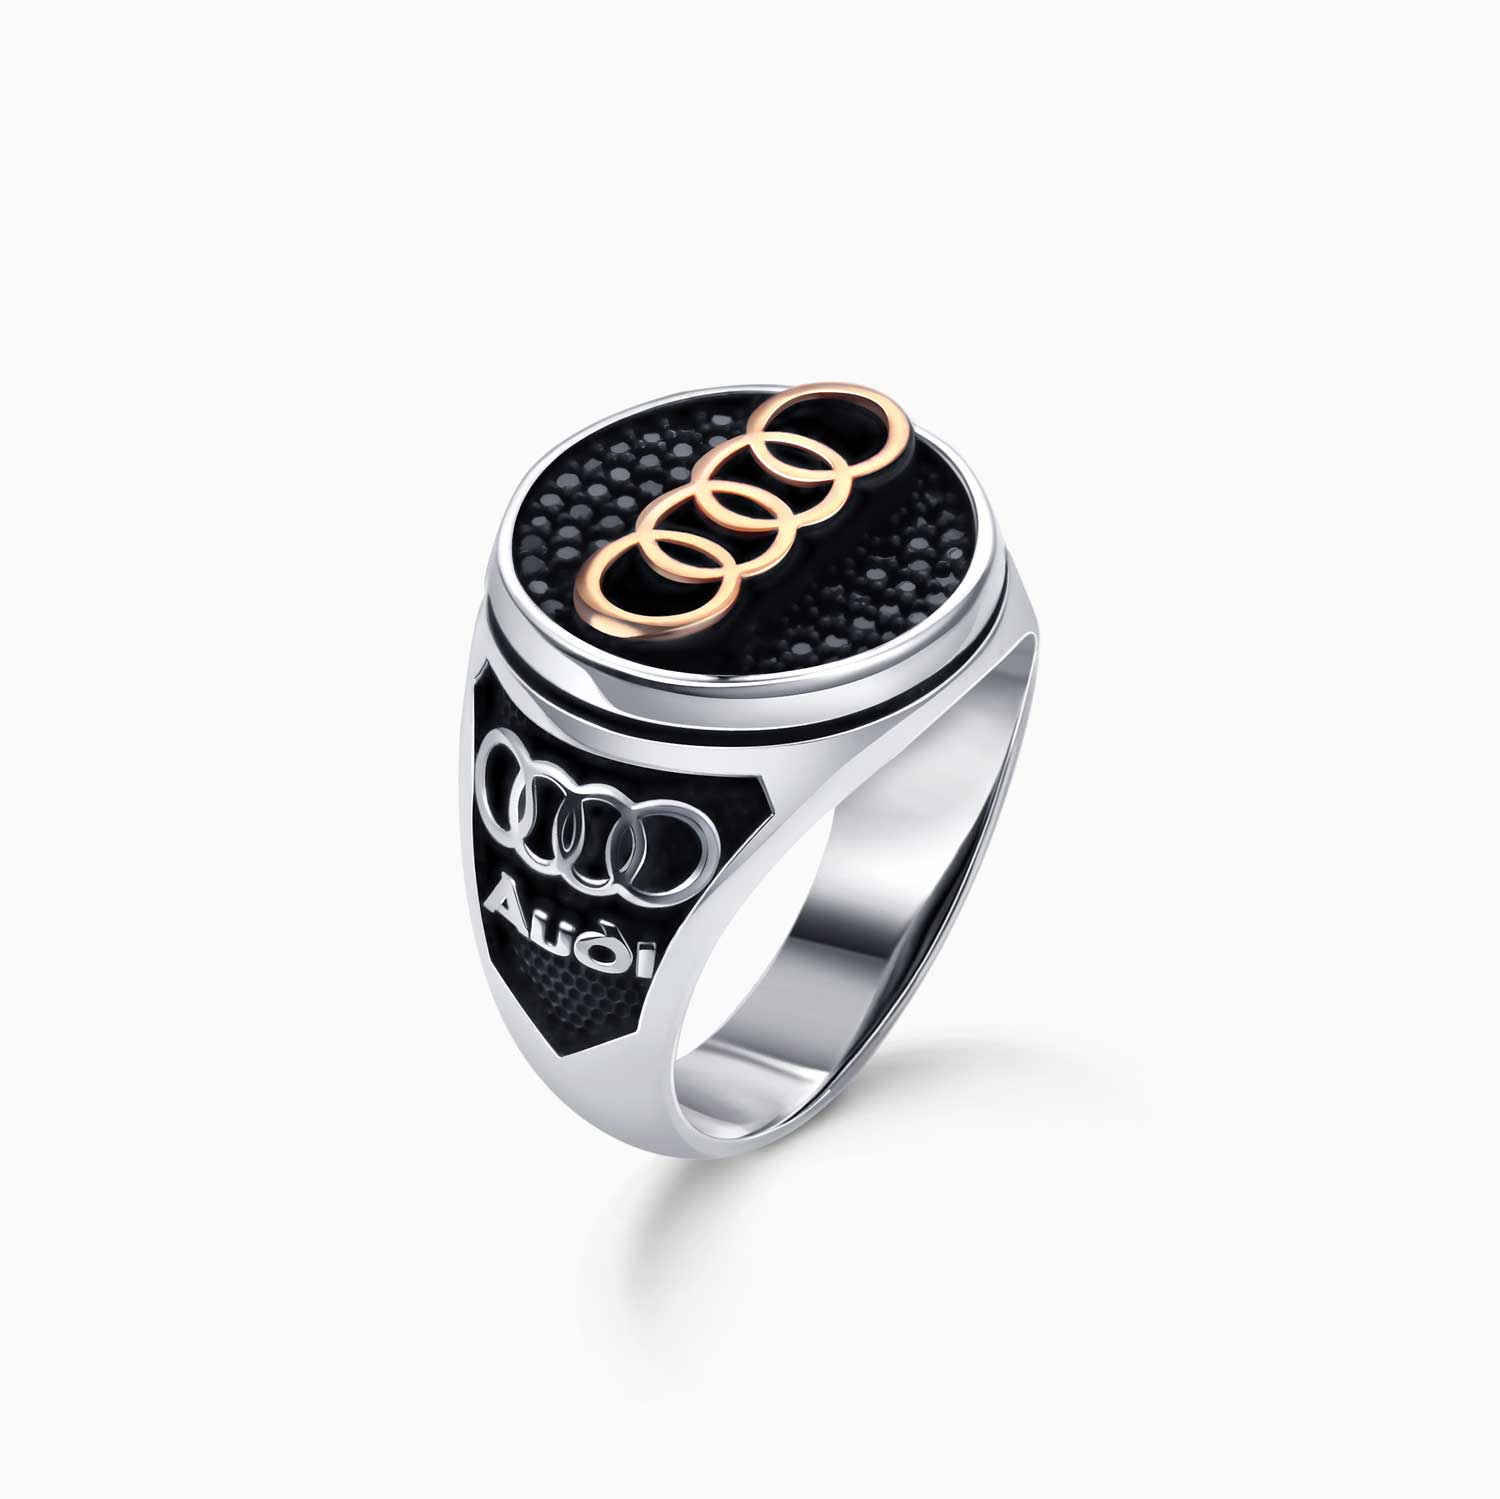 Audi sterling silver 925 and bronze heavy man ring new car ideal